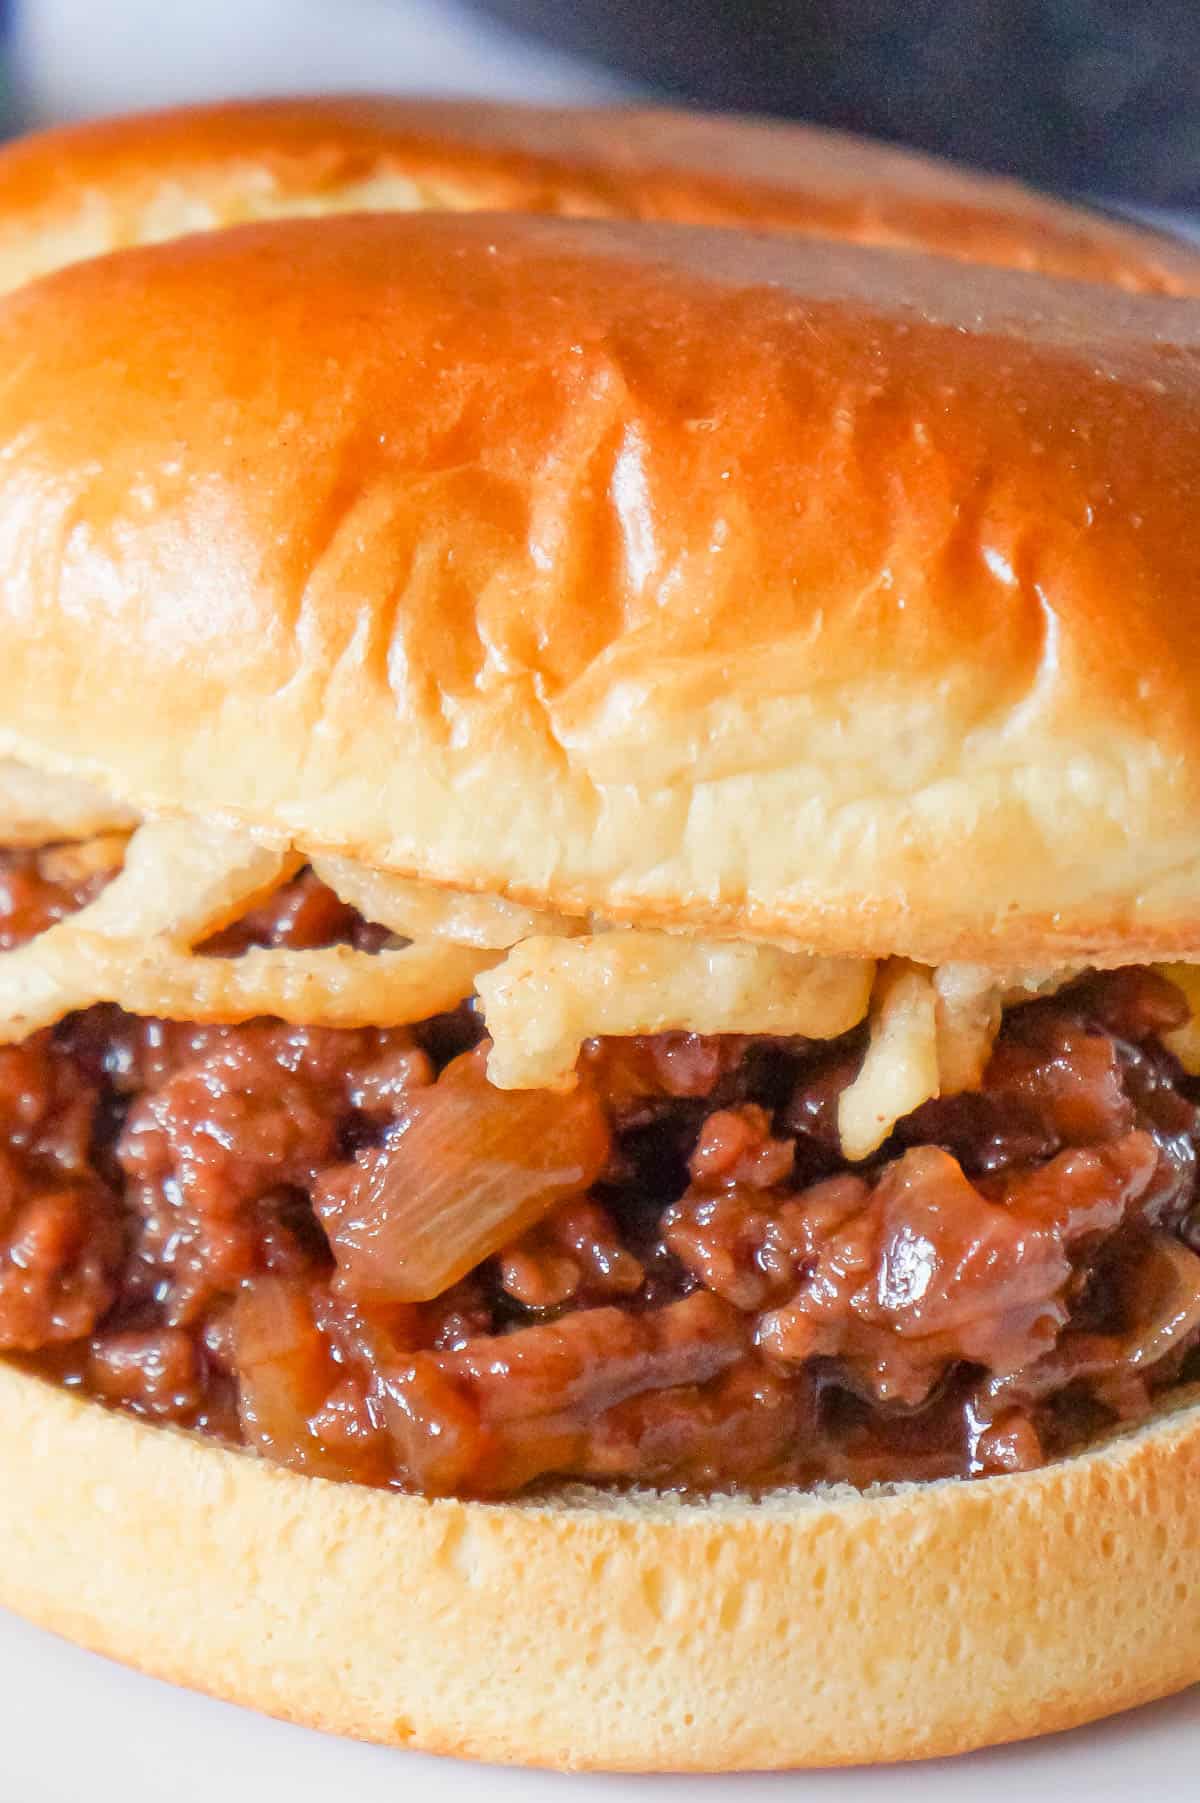 Grape Jelly BBQ Sloppy Joes are a fun twist on the classic sandwich. These tasty sloppy joes are made with ground beef tossed in a mixture of grape jelly and BBQ sauce and topped with French's crispy fried onions.